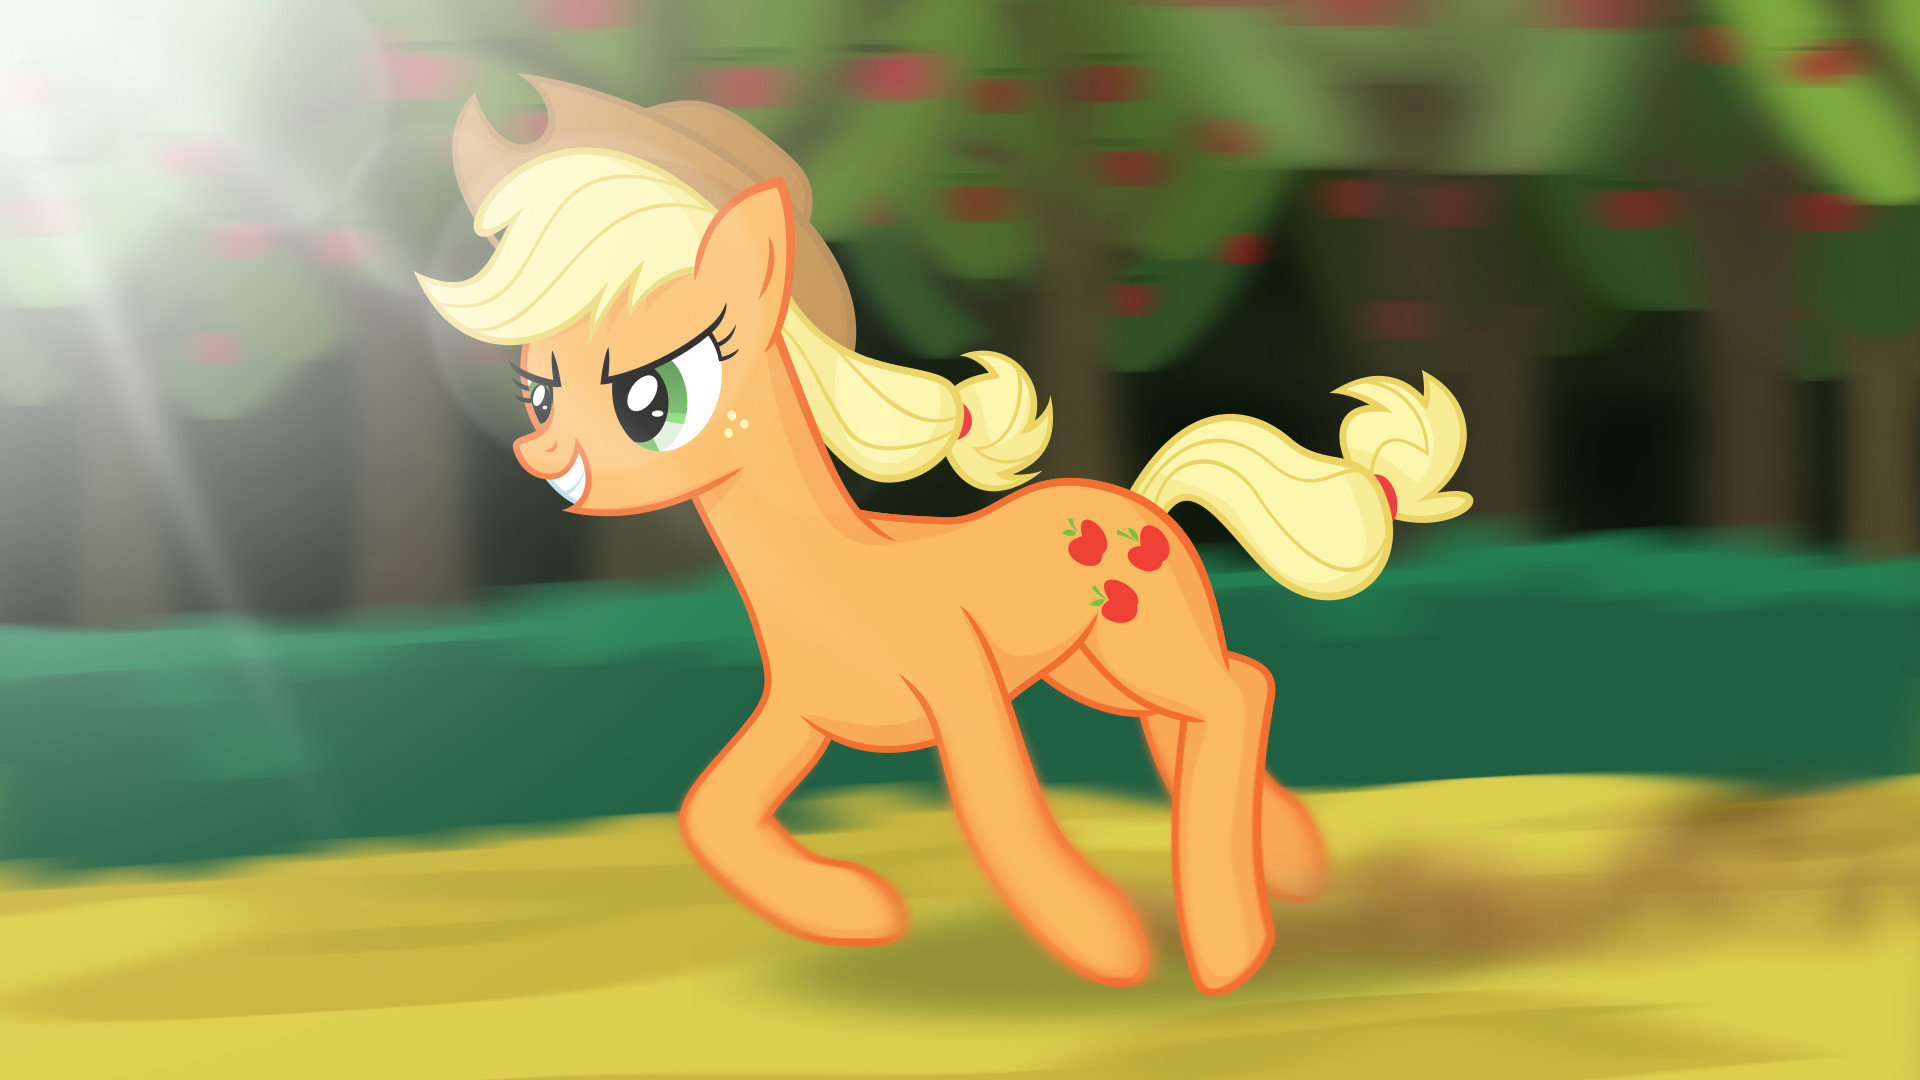 High resolution Applejack (My Little Pony) full hd 1920x1080 background ID:154635 for PC